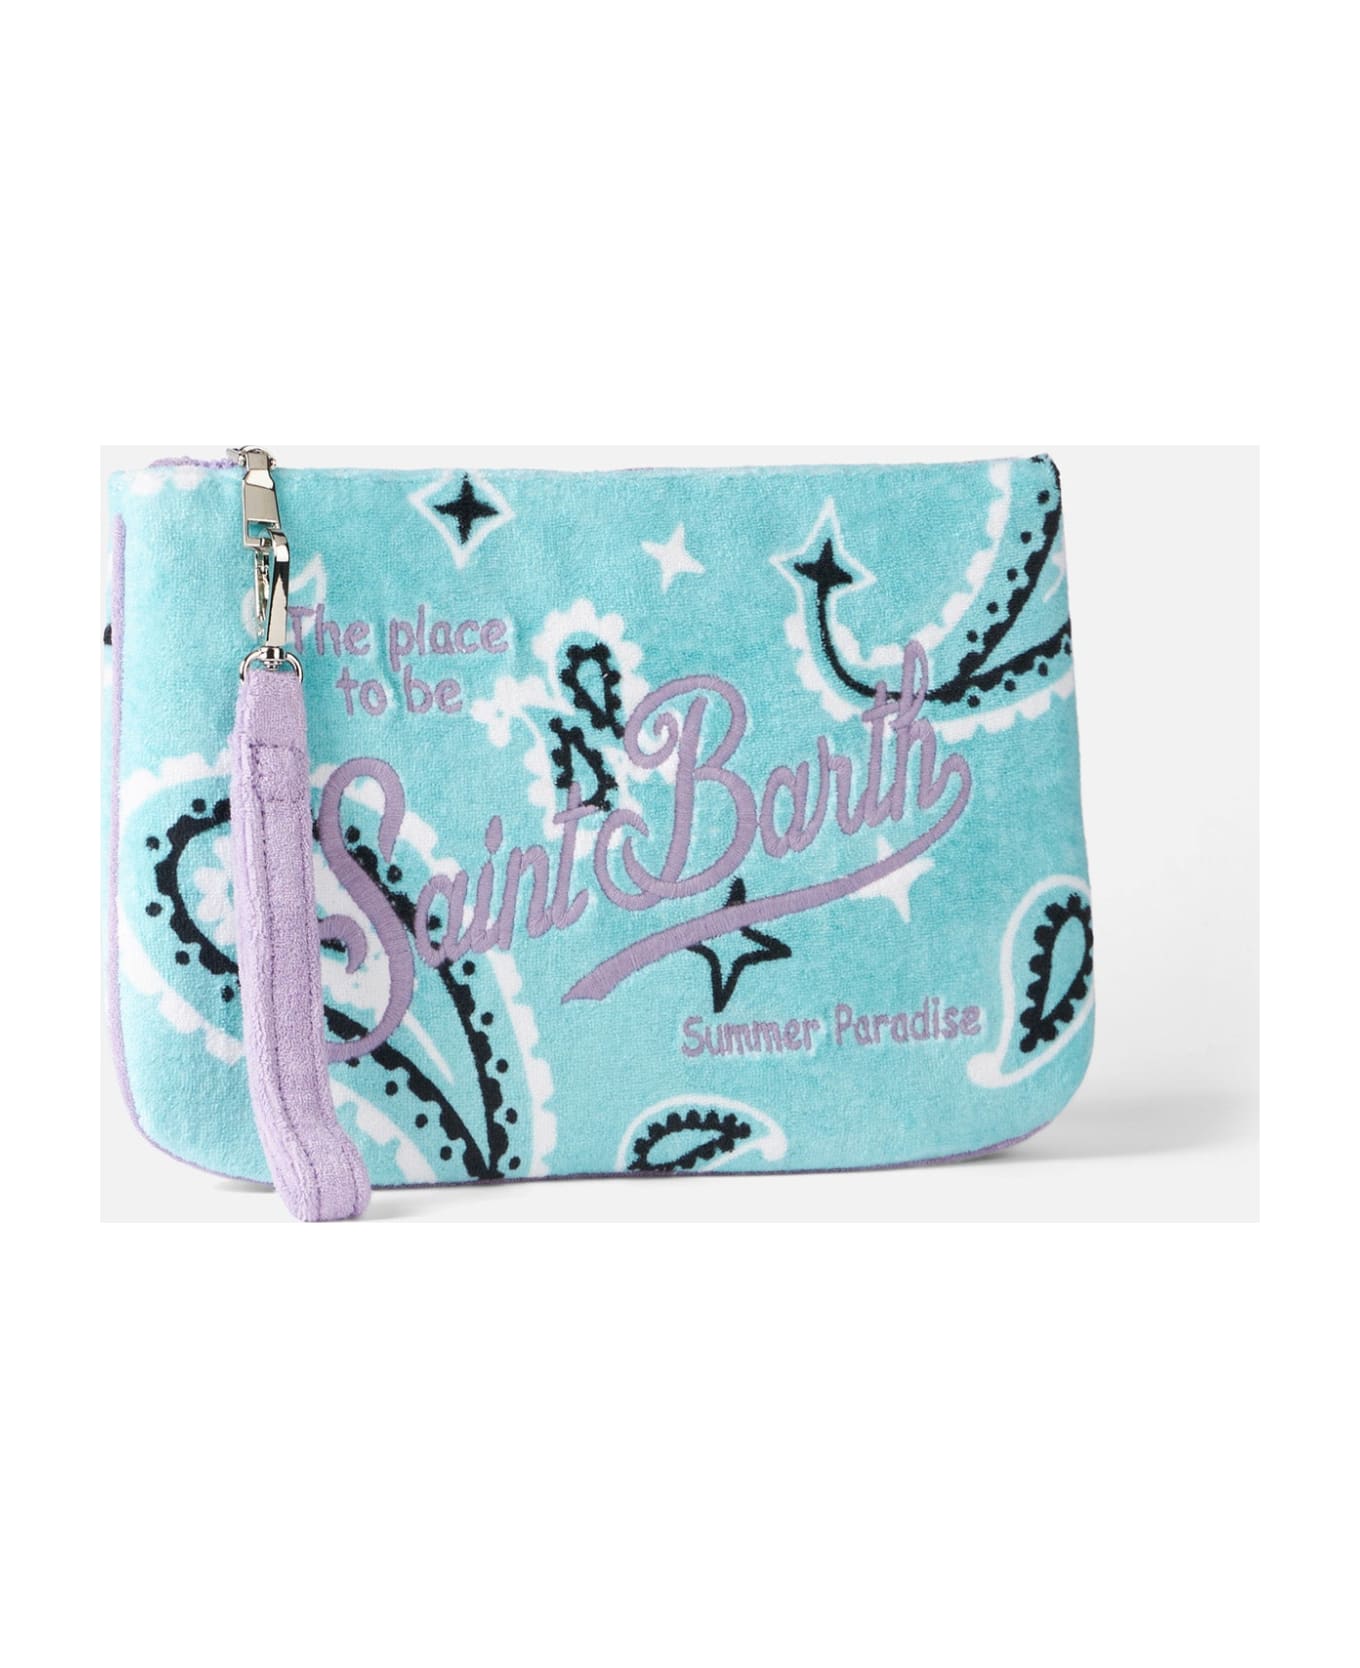 MC2 Saint Barth Parisienne Water Green Terry Pochette With Paisley Print - GREEN